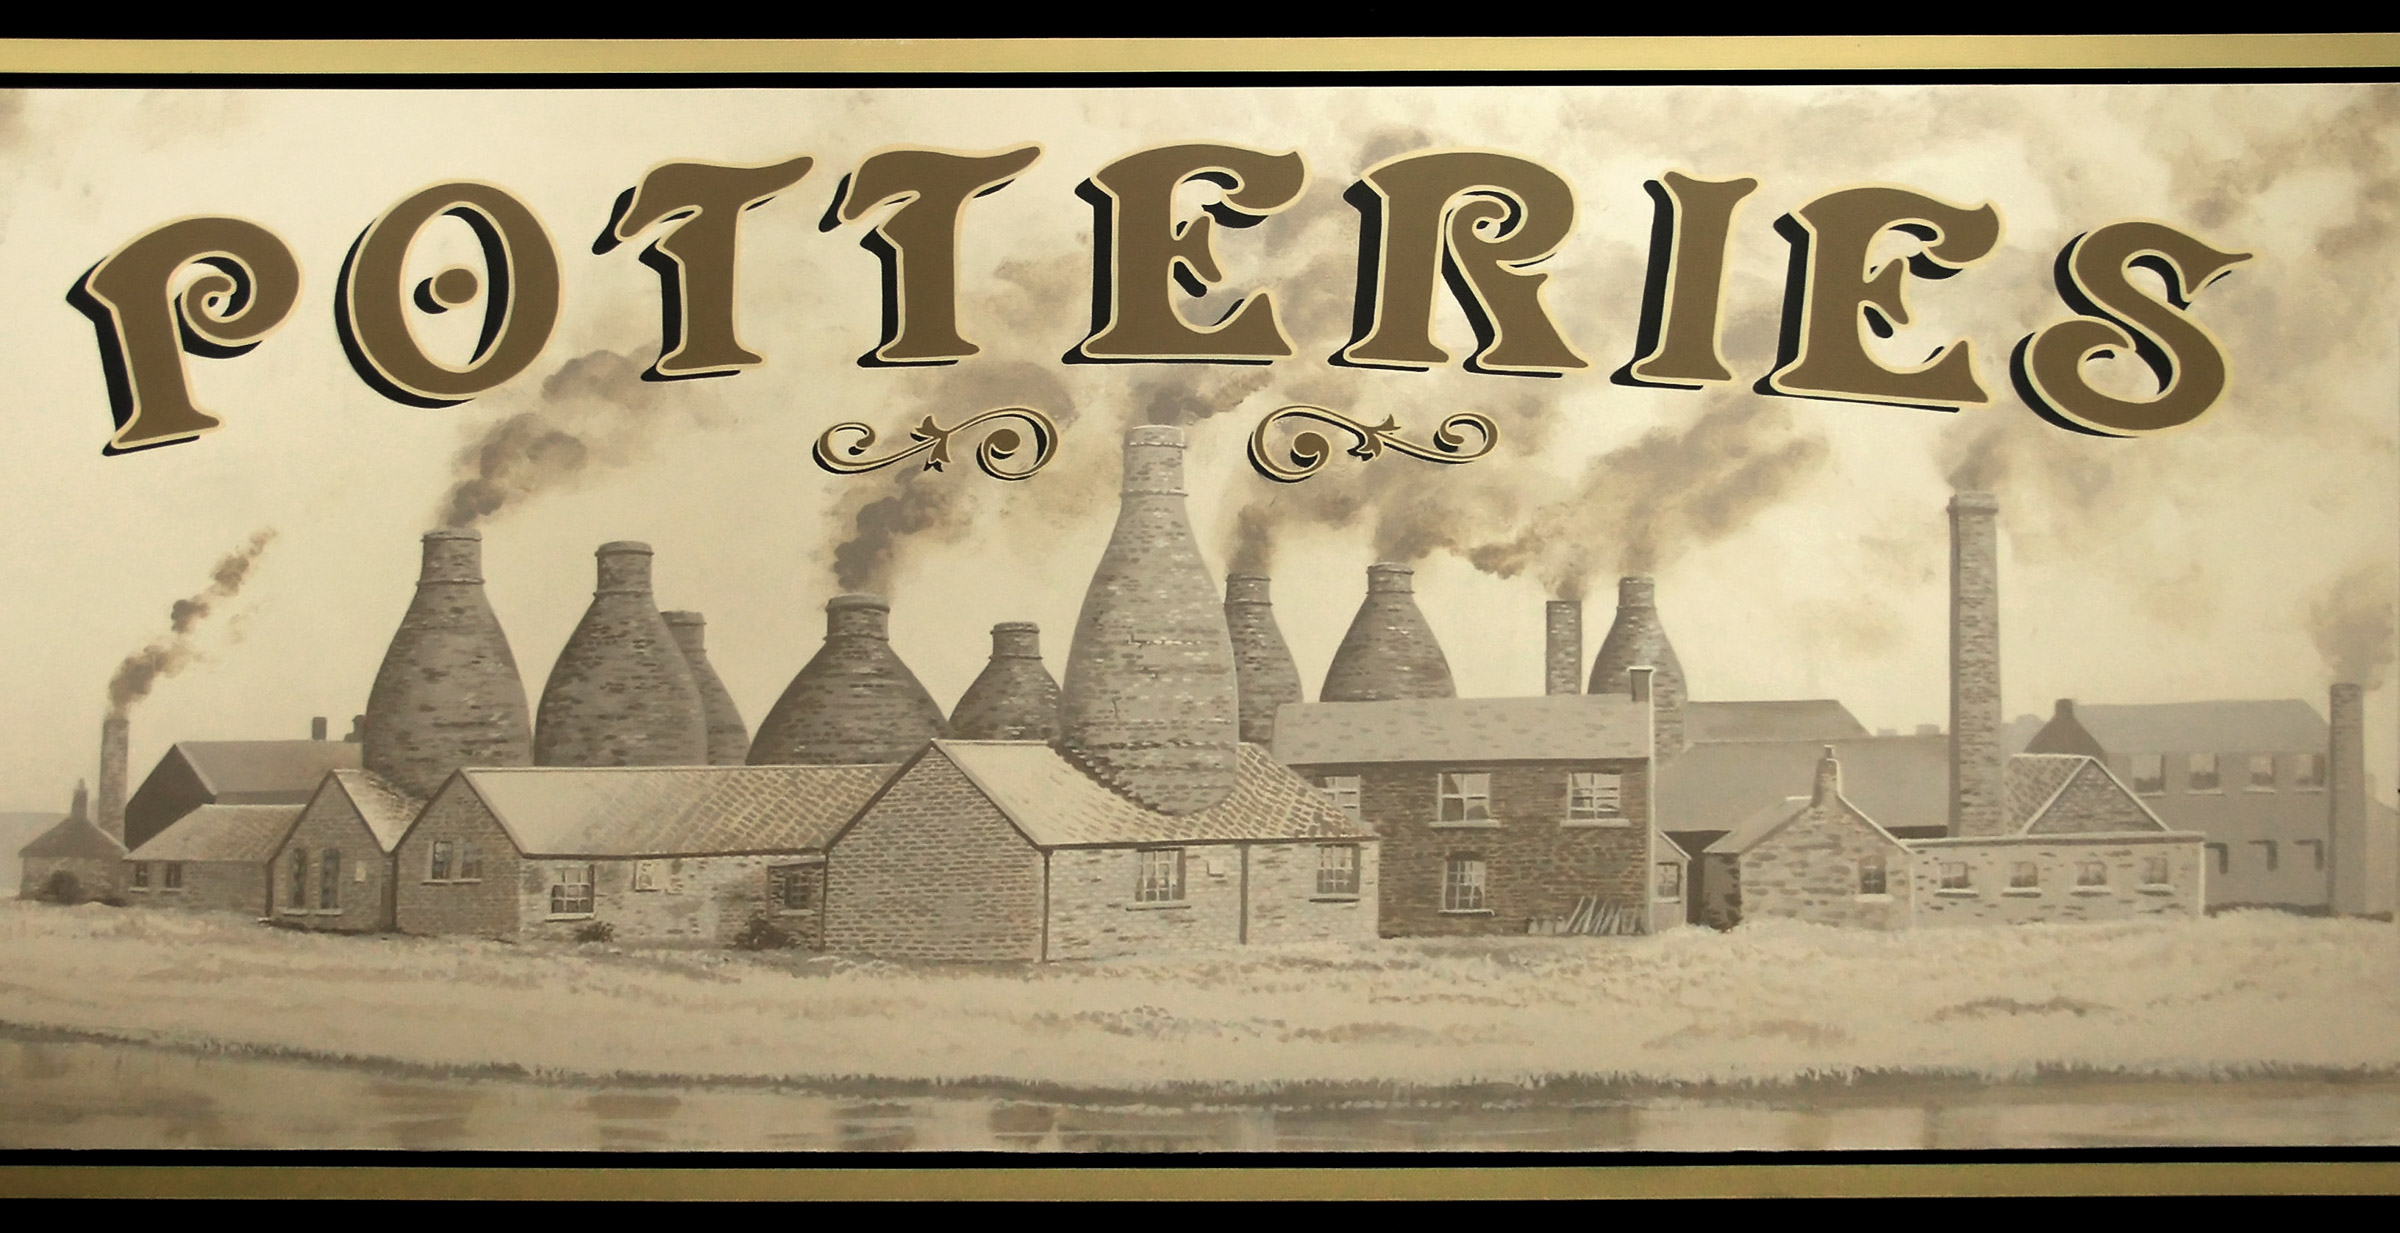 "Potteries" sign written panel and artwork hand-painted on one side of the narrow boat